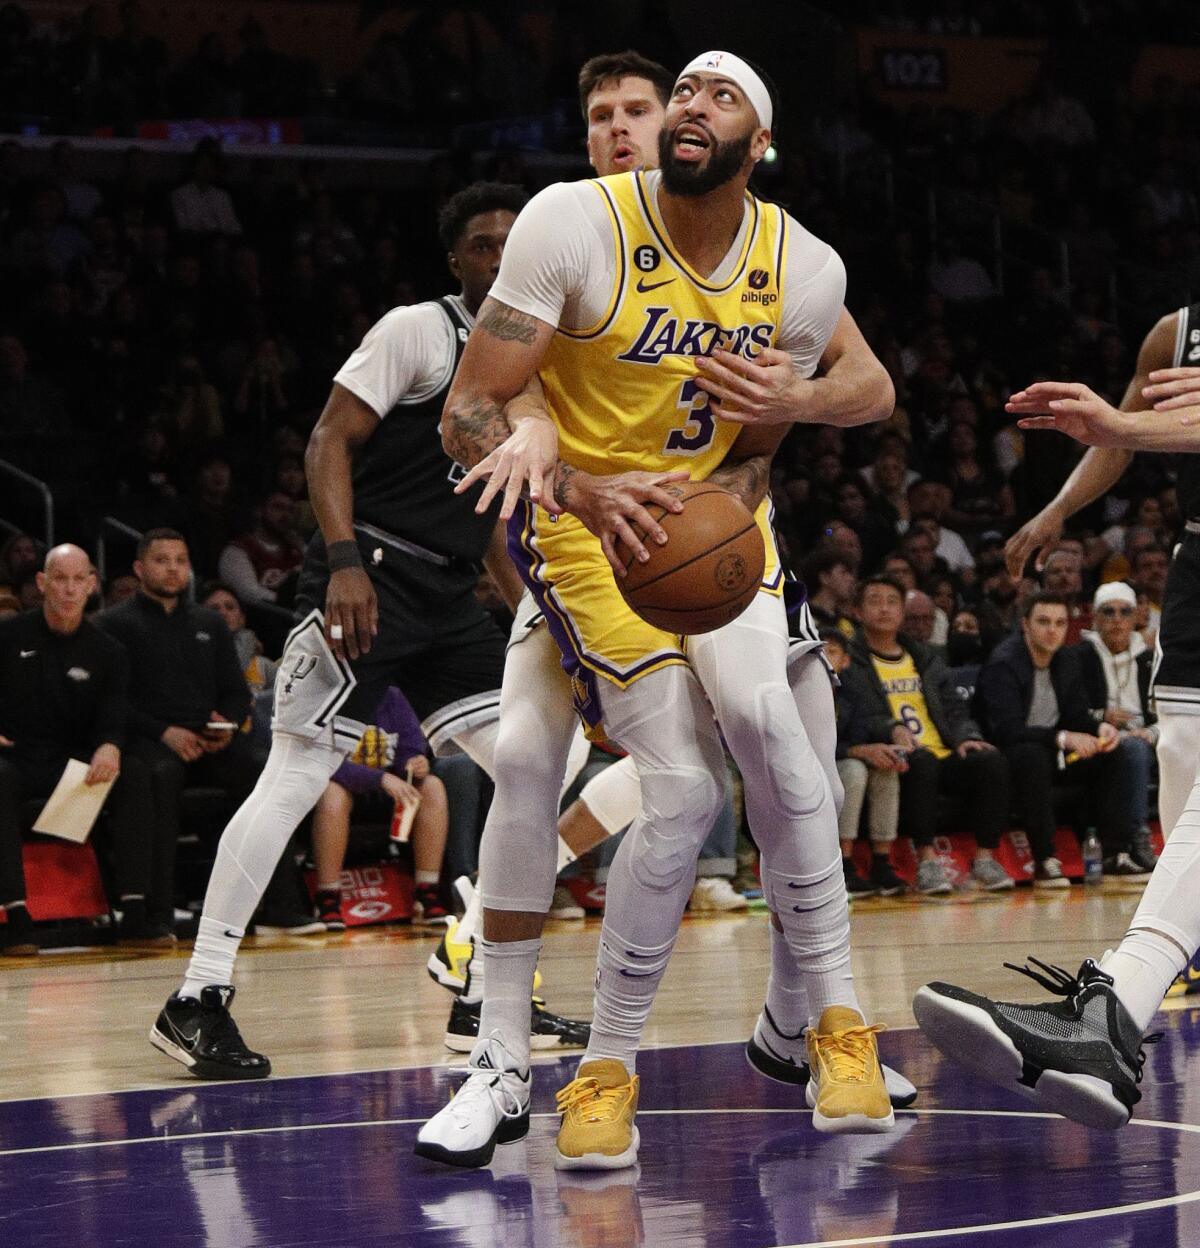 Lakers forward Anthony Davis gets wrapped up by San Antonio Spurs forward Doug McDermott.